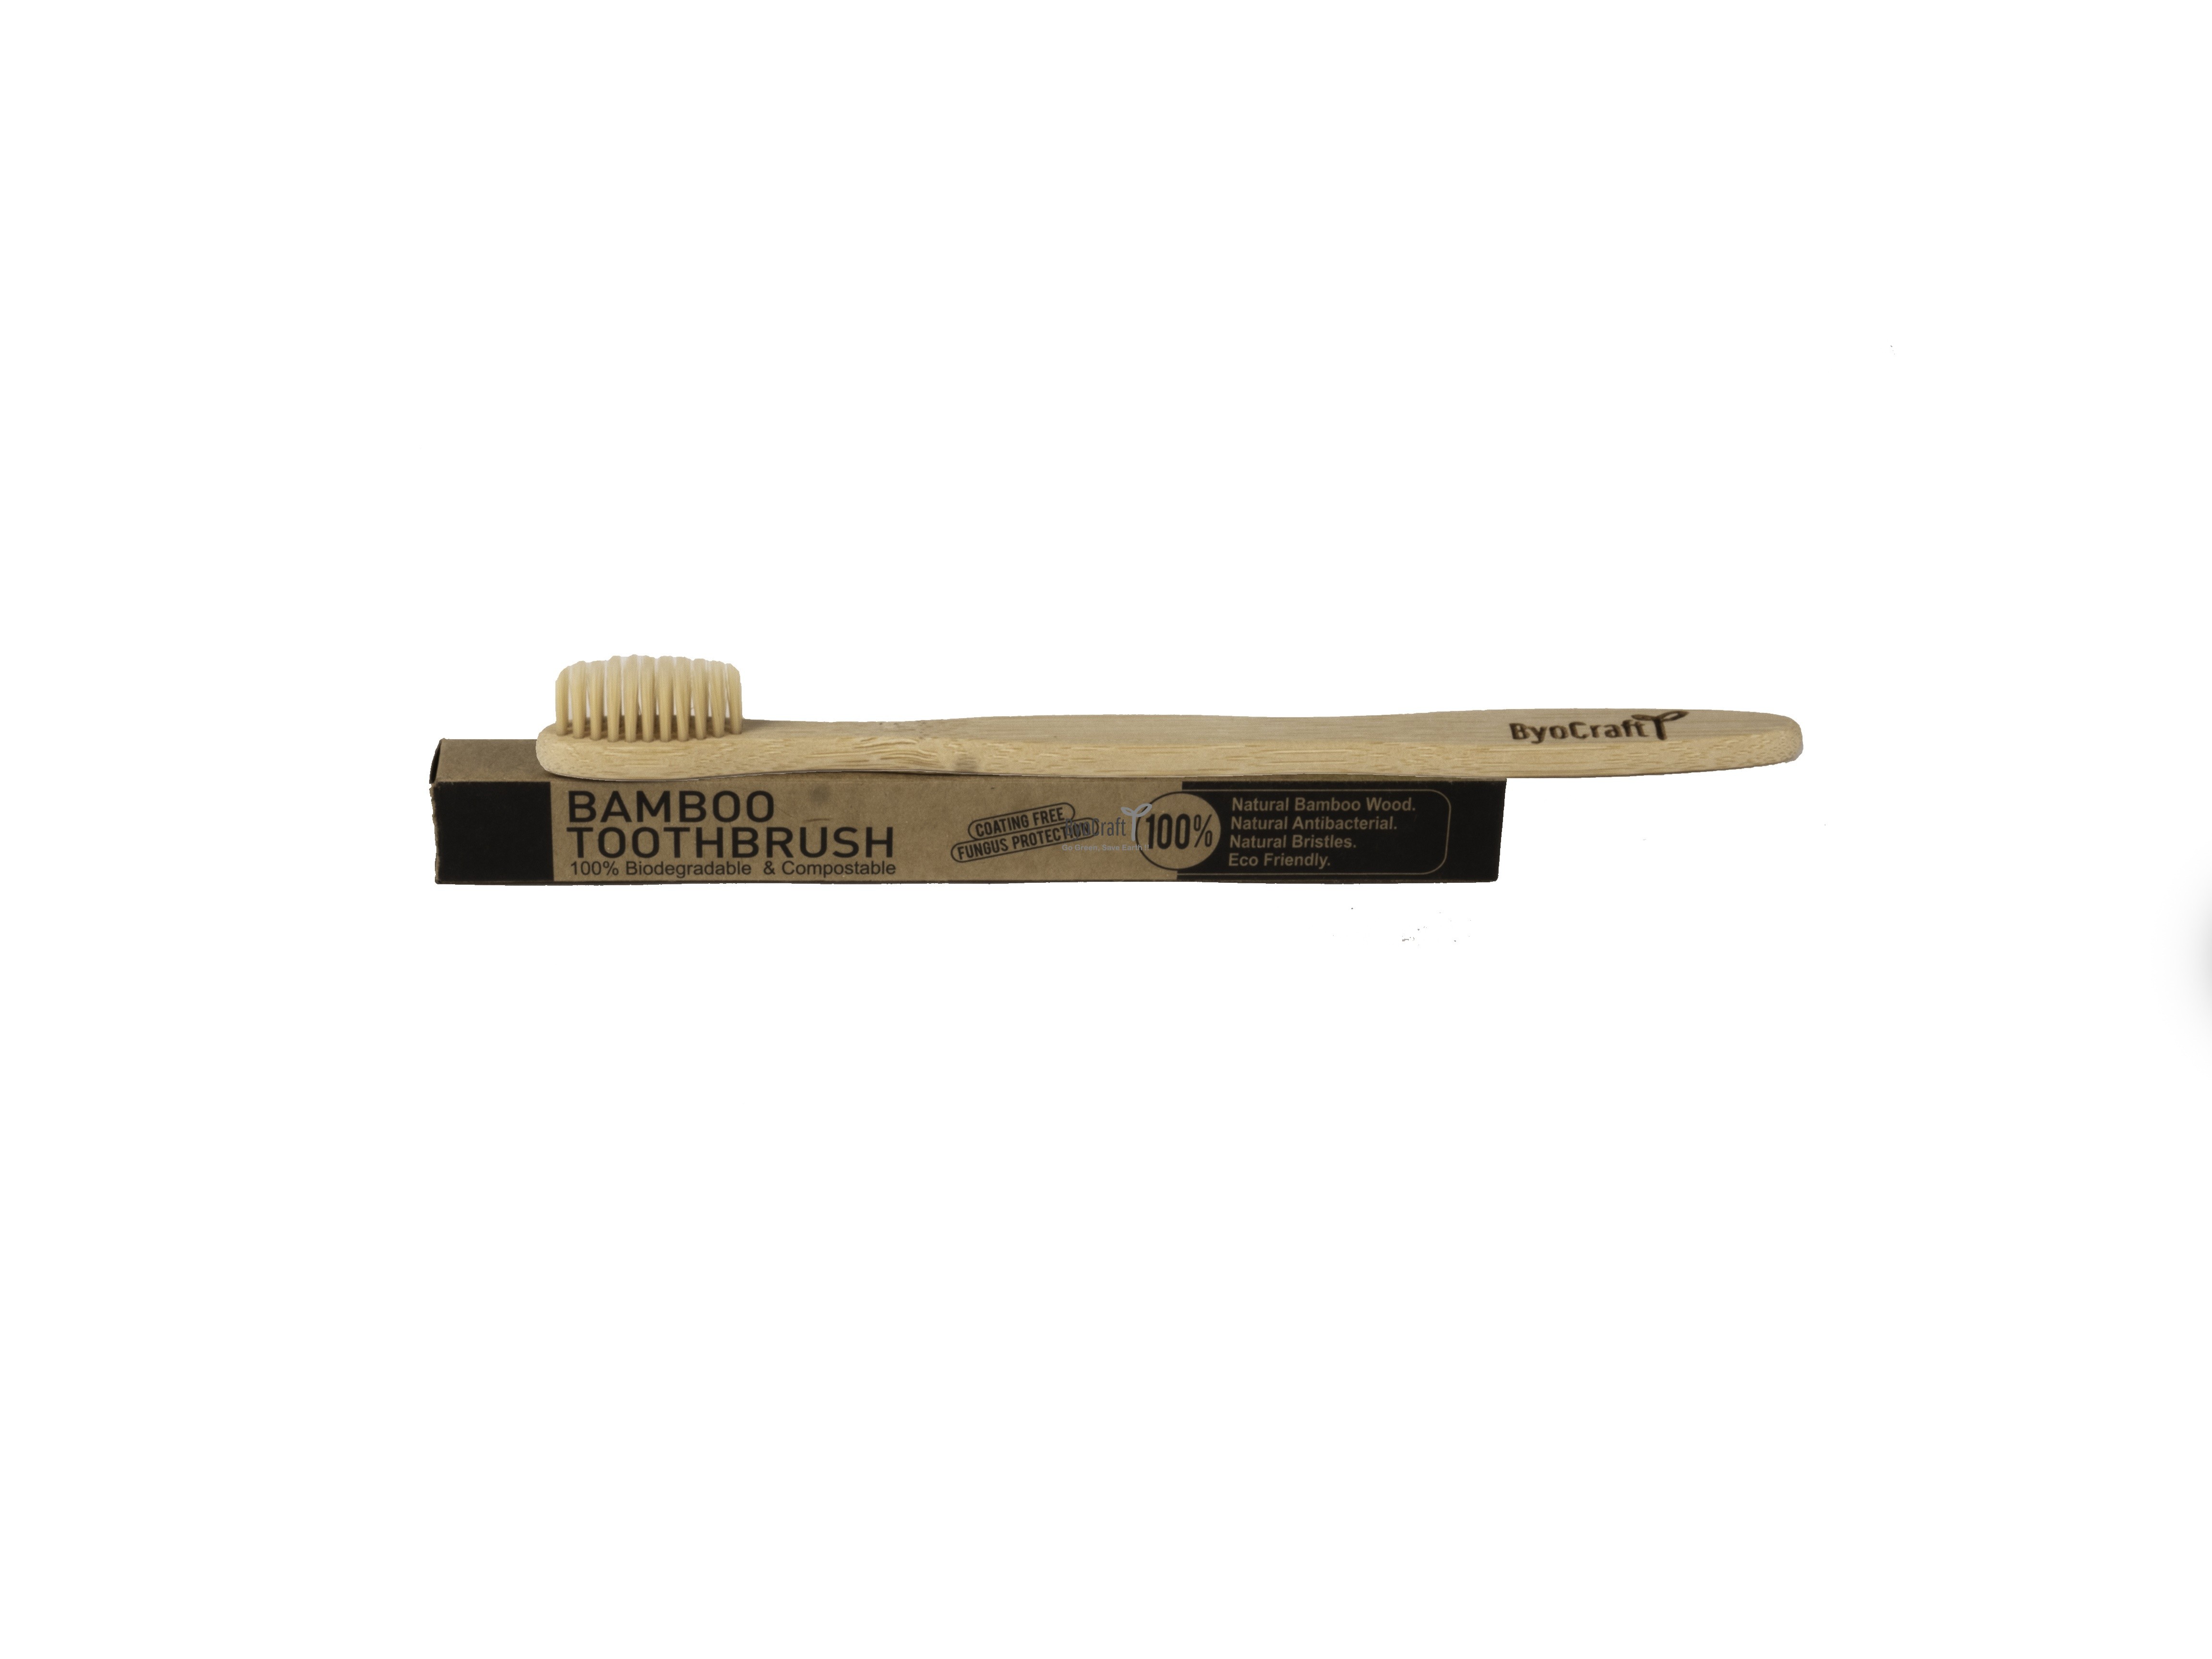 Bamboo Toothbrush - S & Flat curve (bamboo bristle)